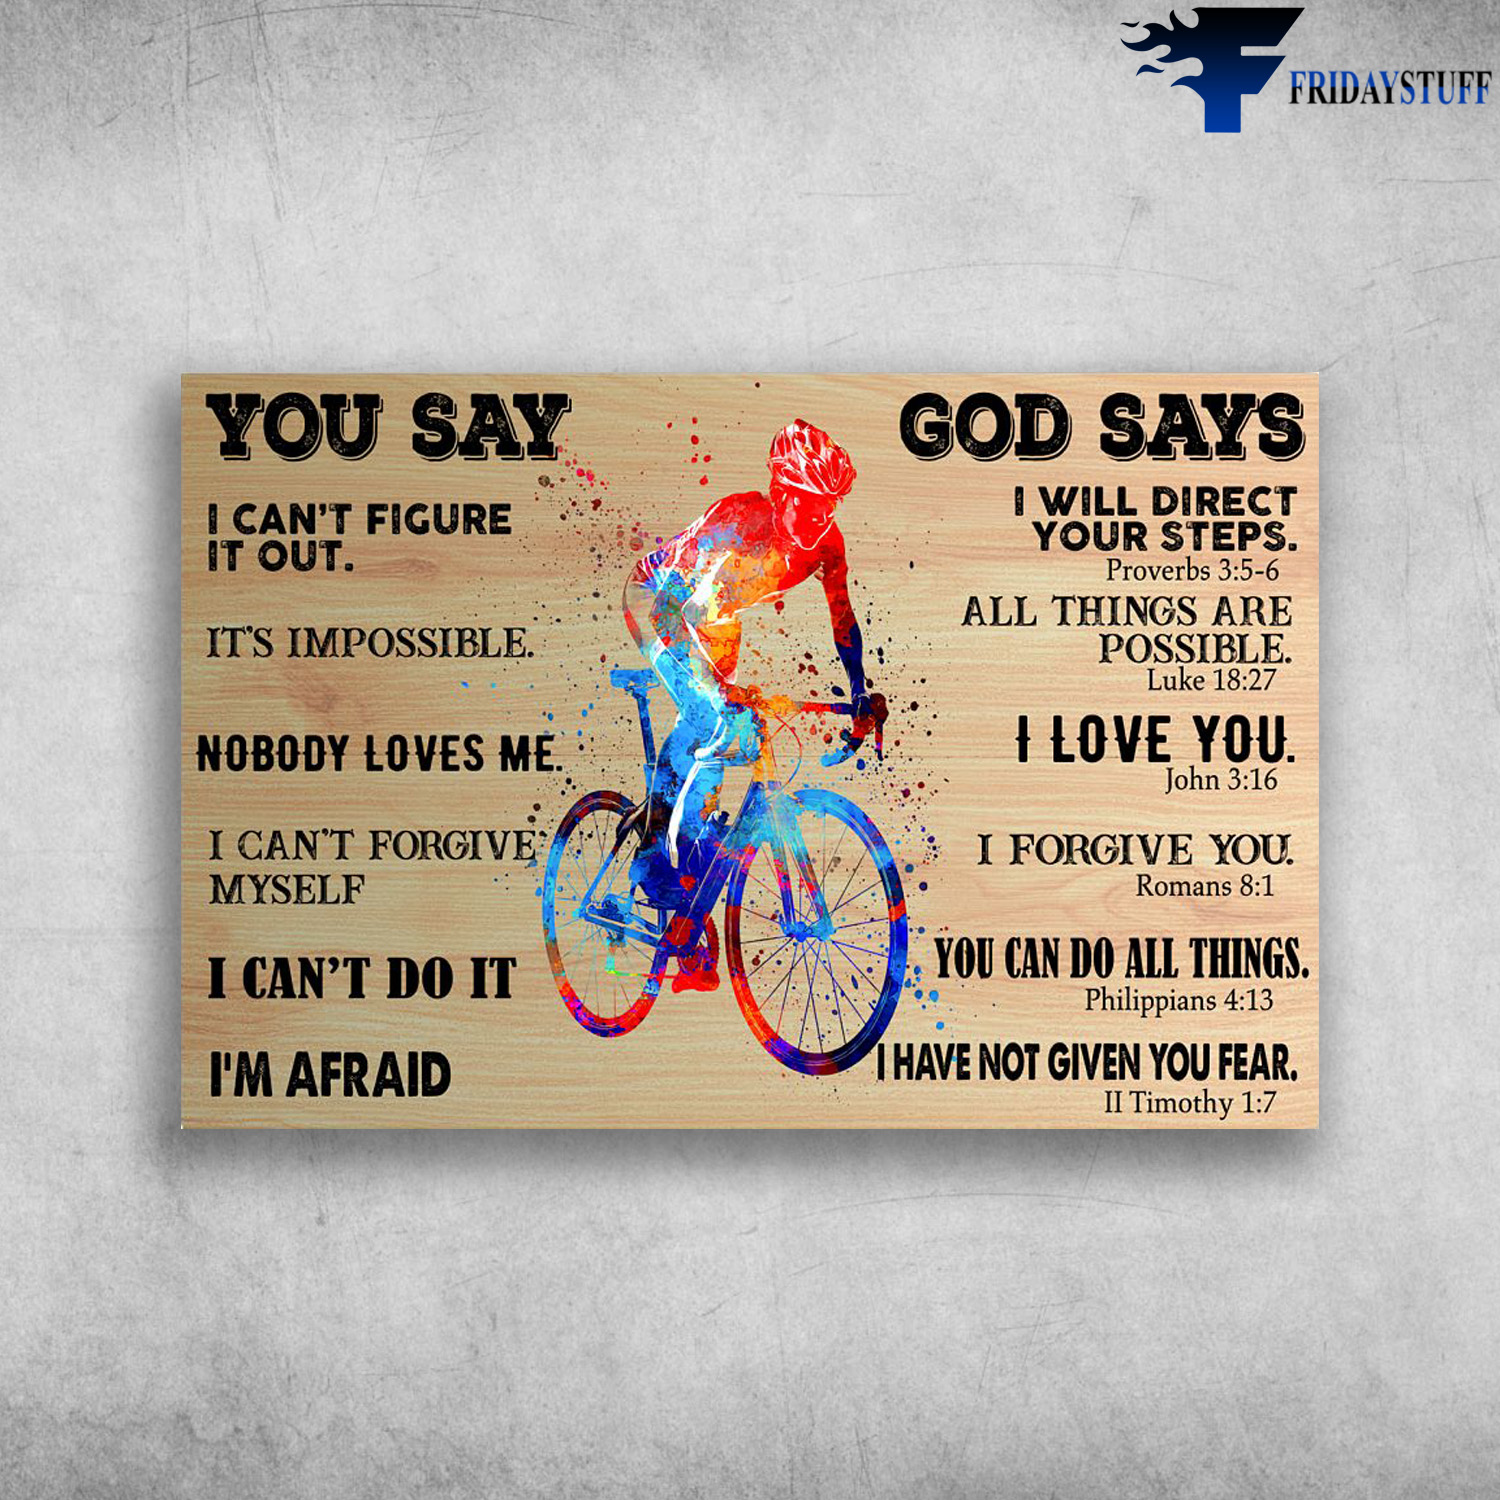 Cycling Man - You Say I Can't Figure, It's Impossible Nobody Loves Me, I Can't For Give Myself, I Can't Do It, I'm Afraid, God Says I Will Direct Your Steps, All Things Are Possible, I Love You, I Forgive You